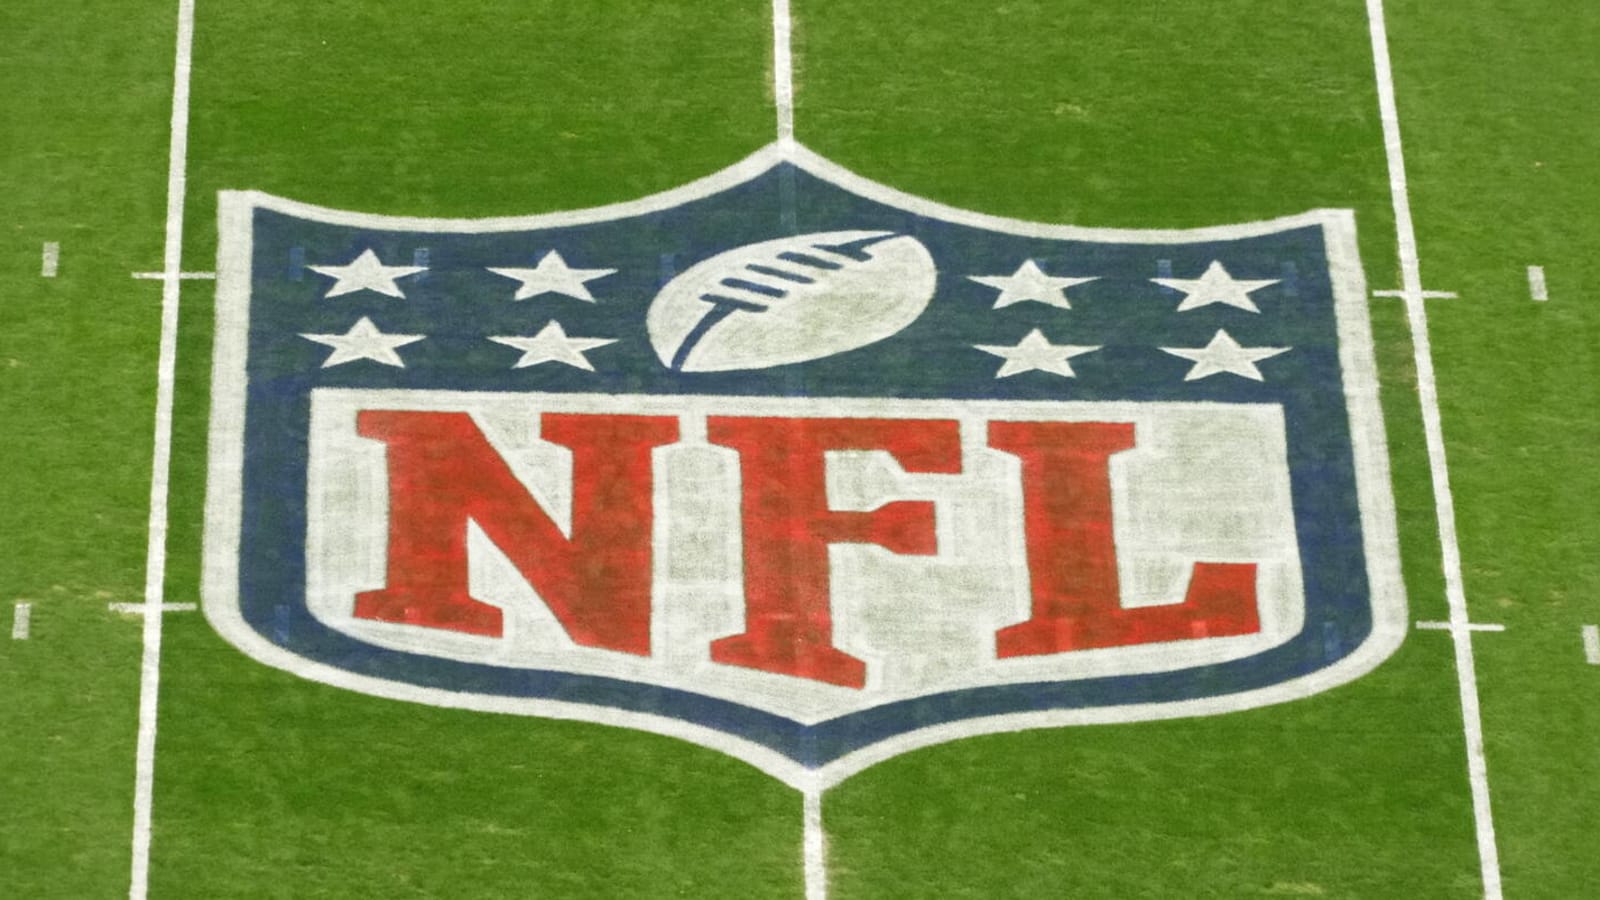 Full 2022 NFL schedule release set for May 12